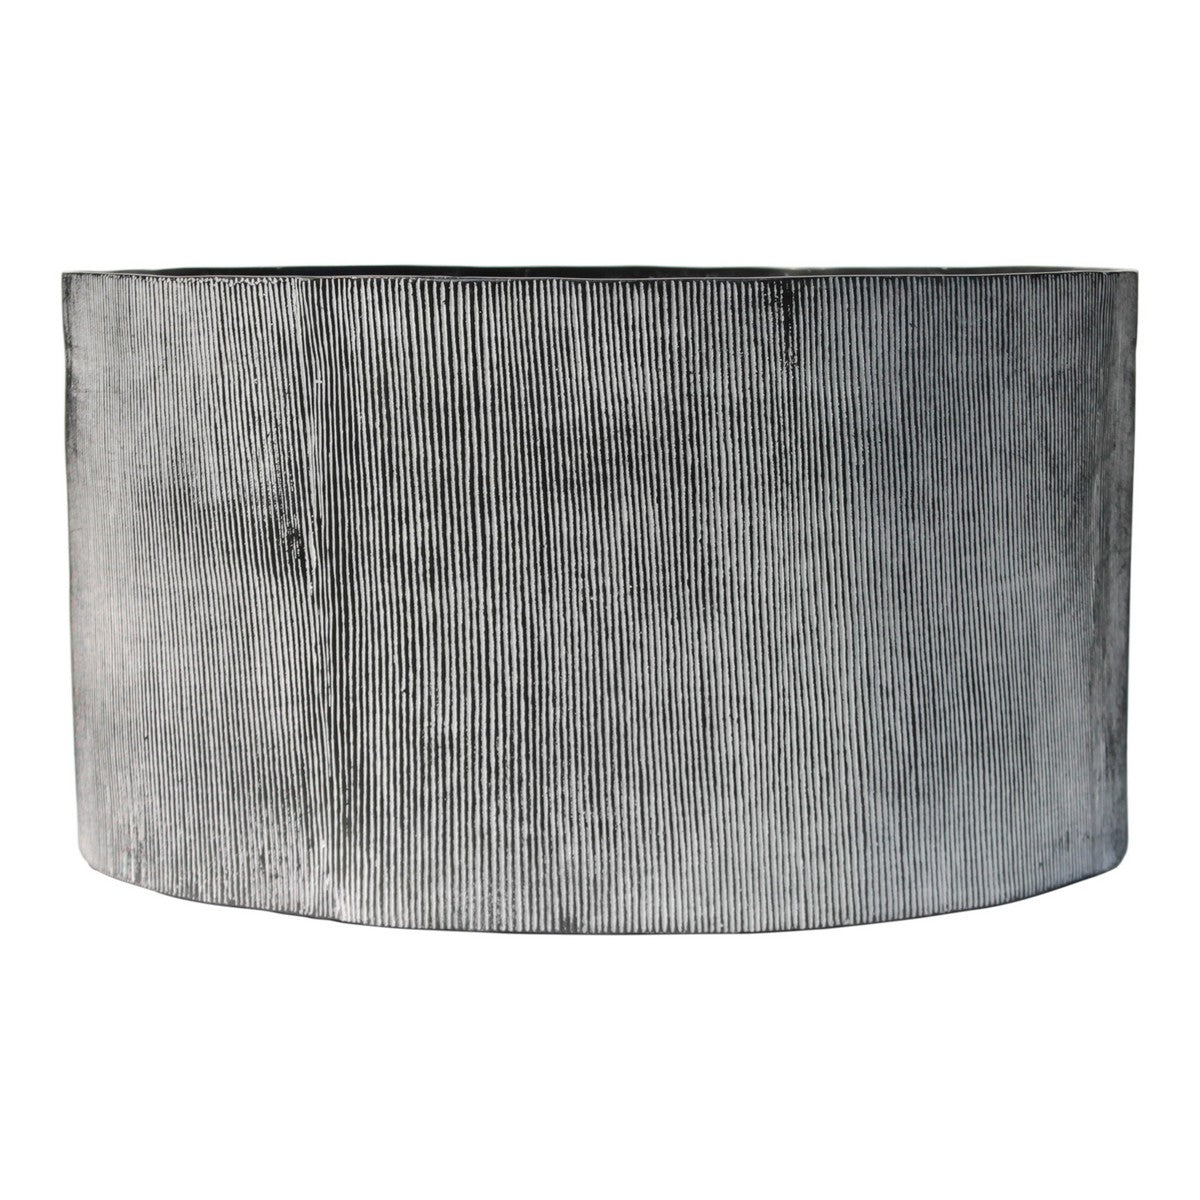 Moe's Home Collection Althea Coffee Table Black Patina - QK-1027-02 - Moe's Home Collection - Coffee Tables - Minimal And Modern - 1